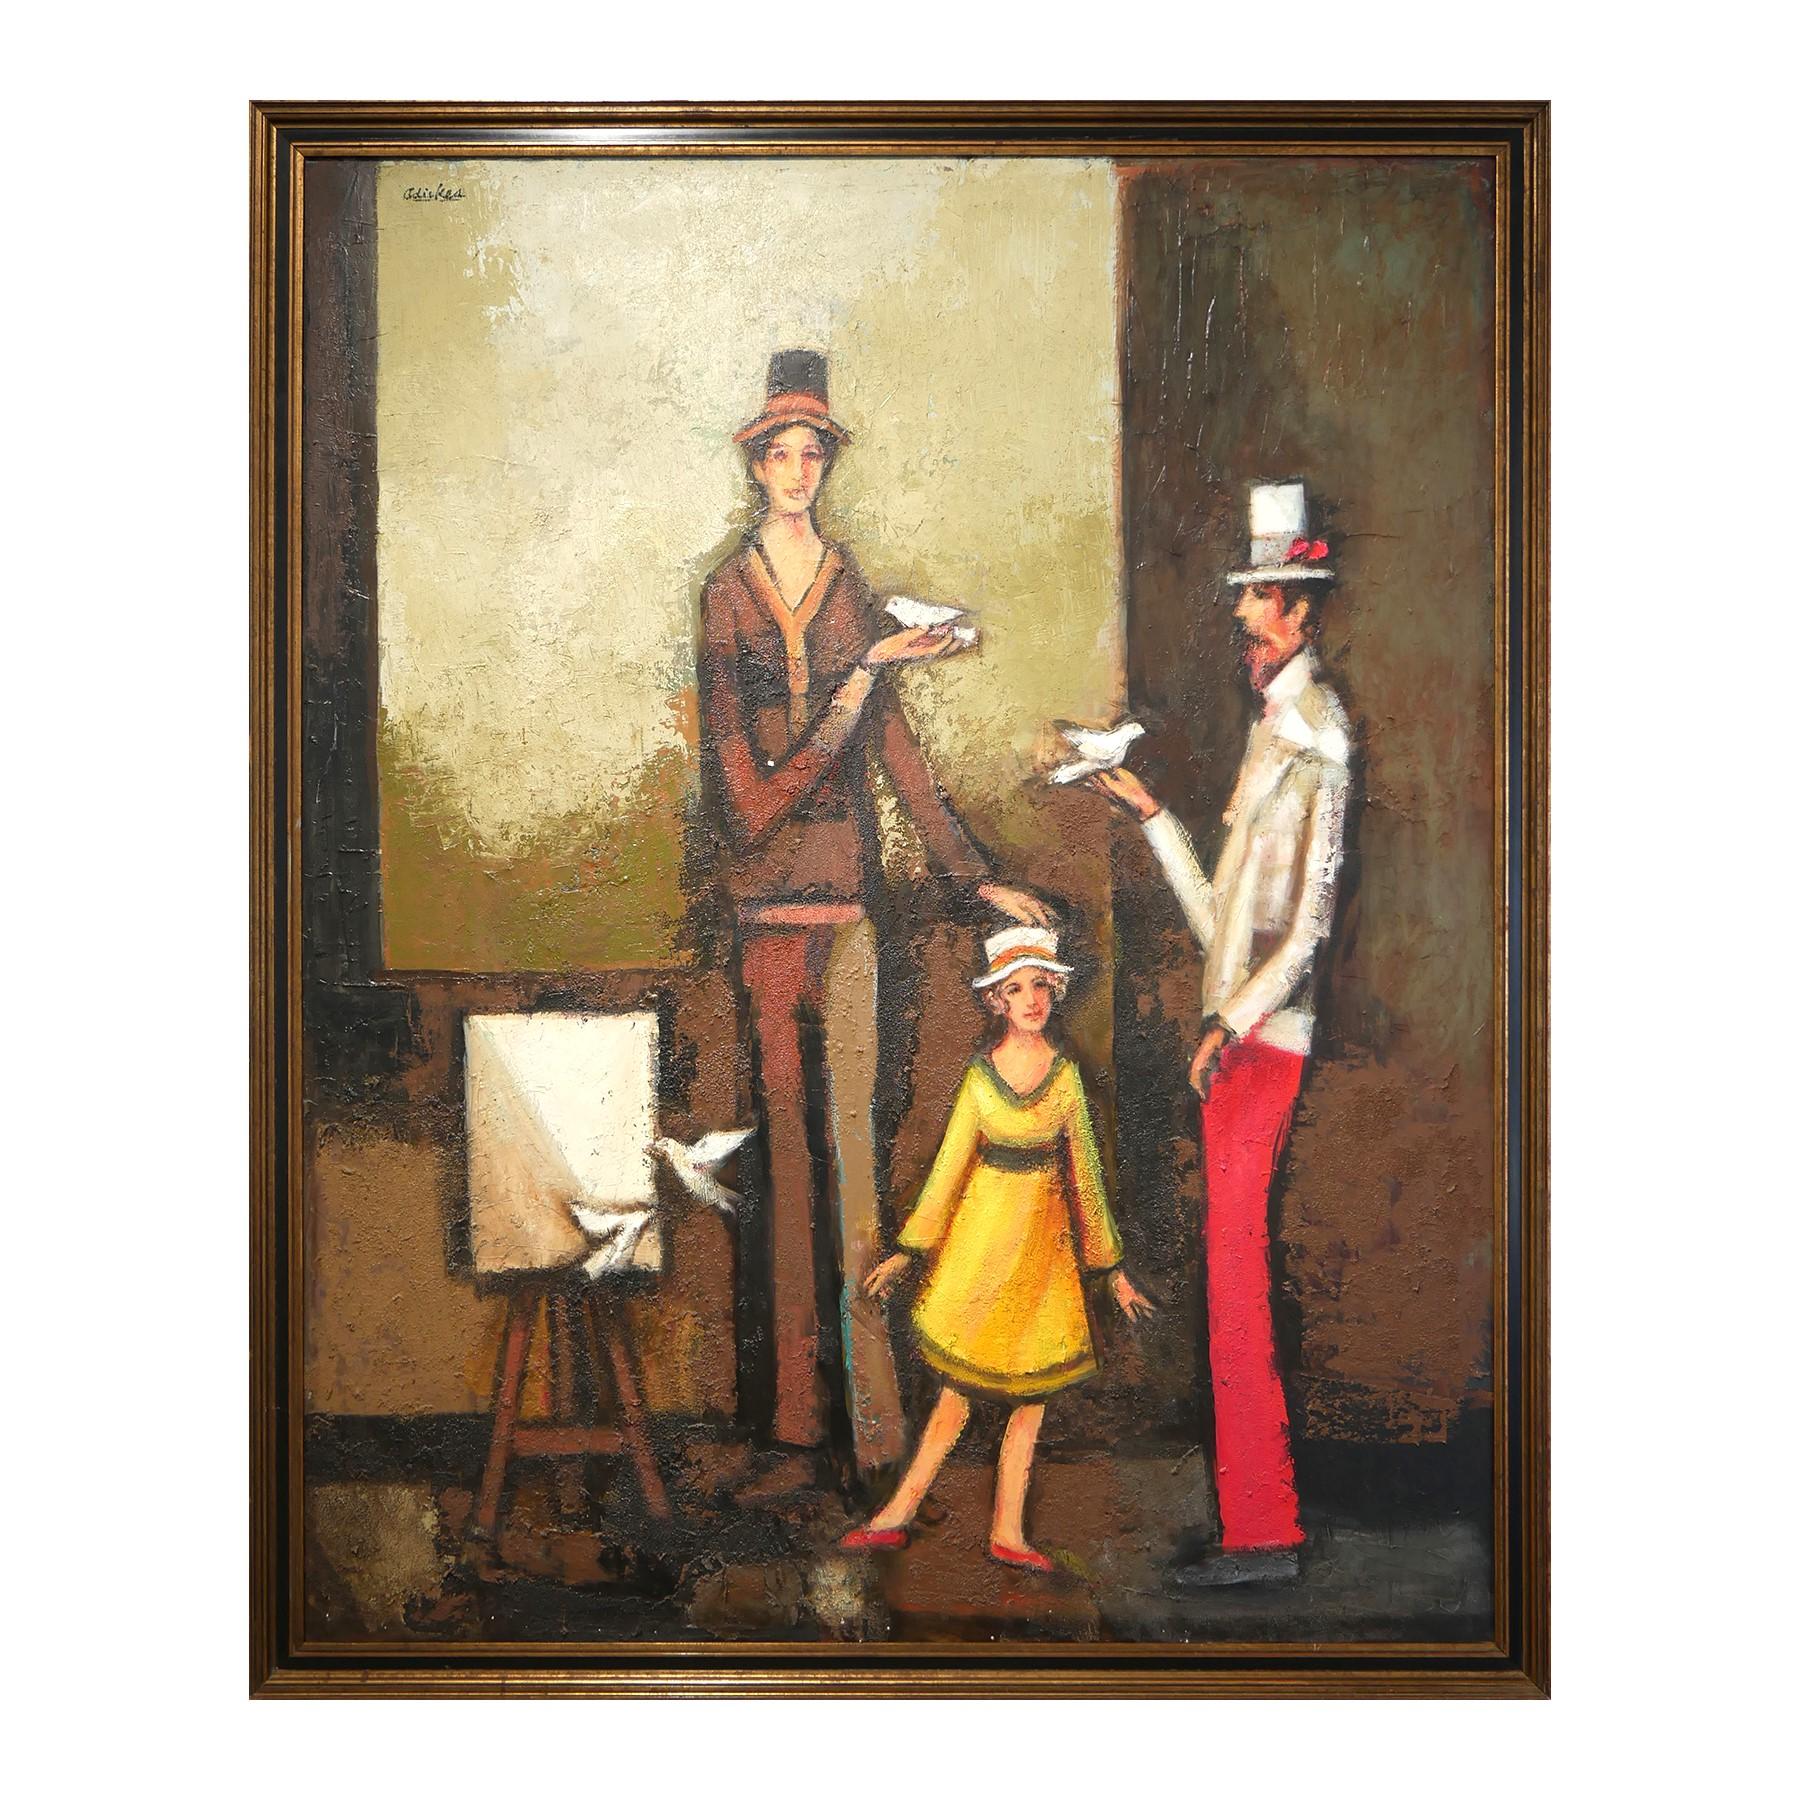 Modern abstract figurative portrait painting by Houston, TX artist David Adickes. The work features a two men in suits with a young girl wearing yellow posing with birds and a blank canvas set against a neutral toned background. Signed by the artist